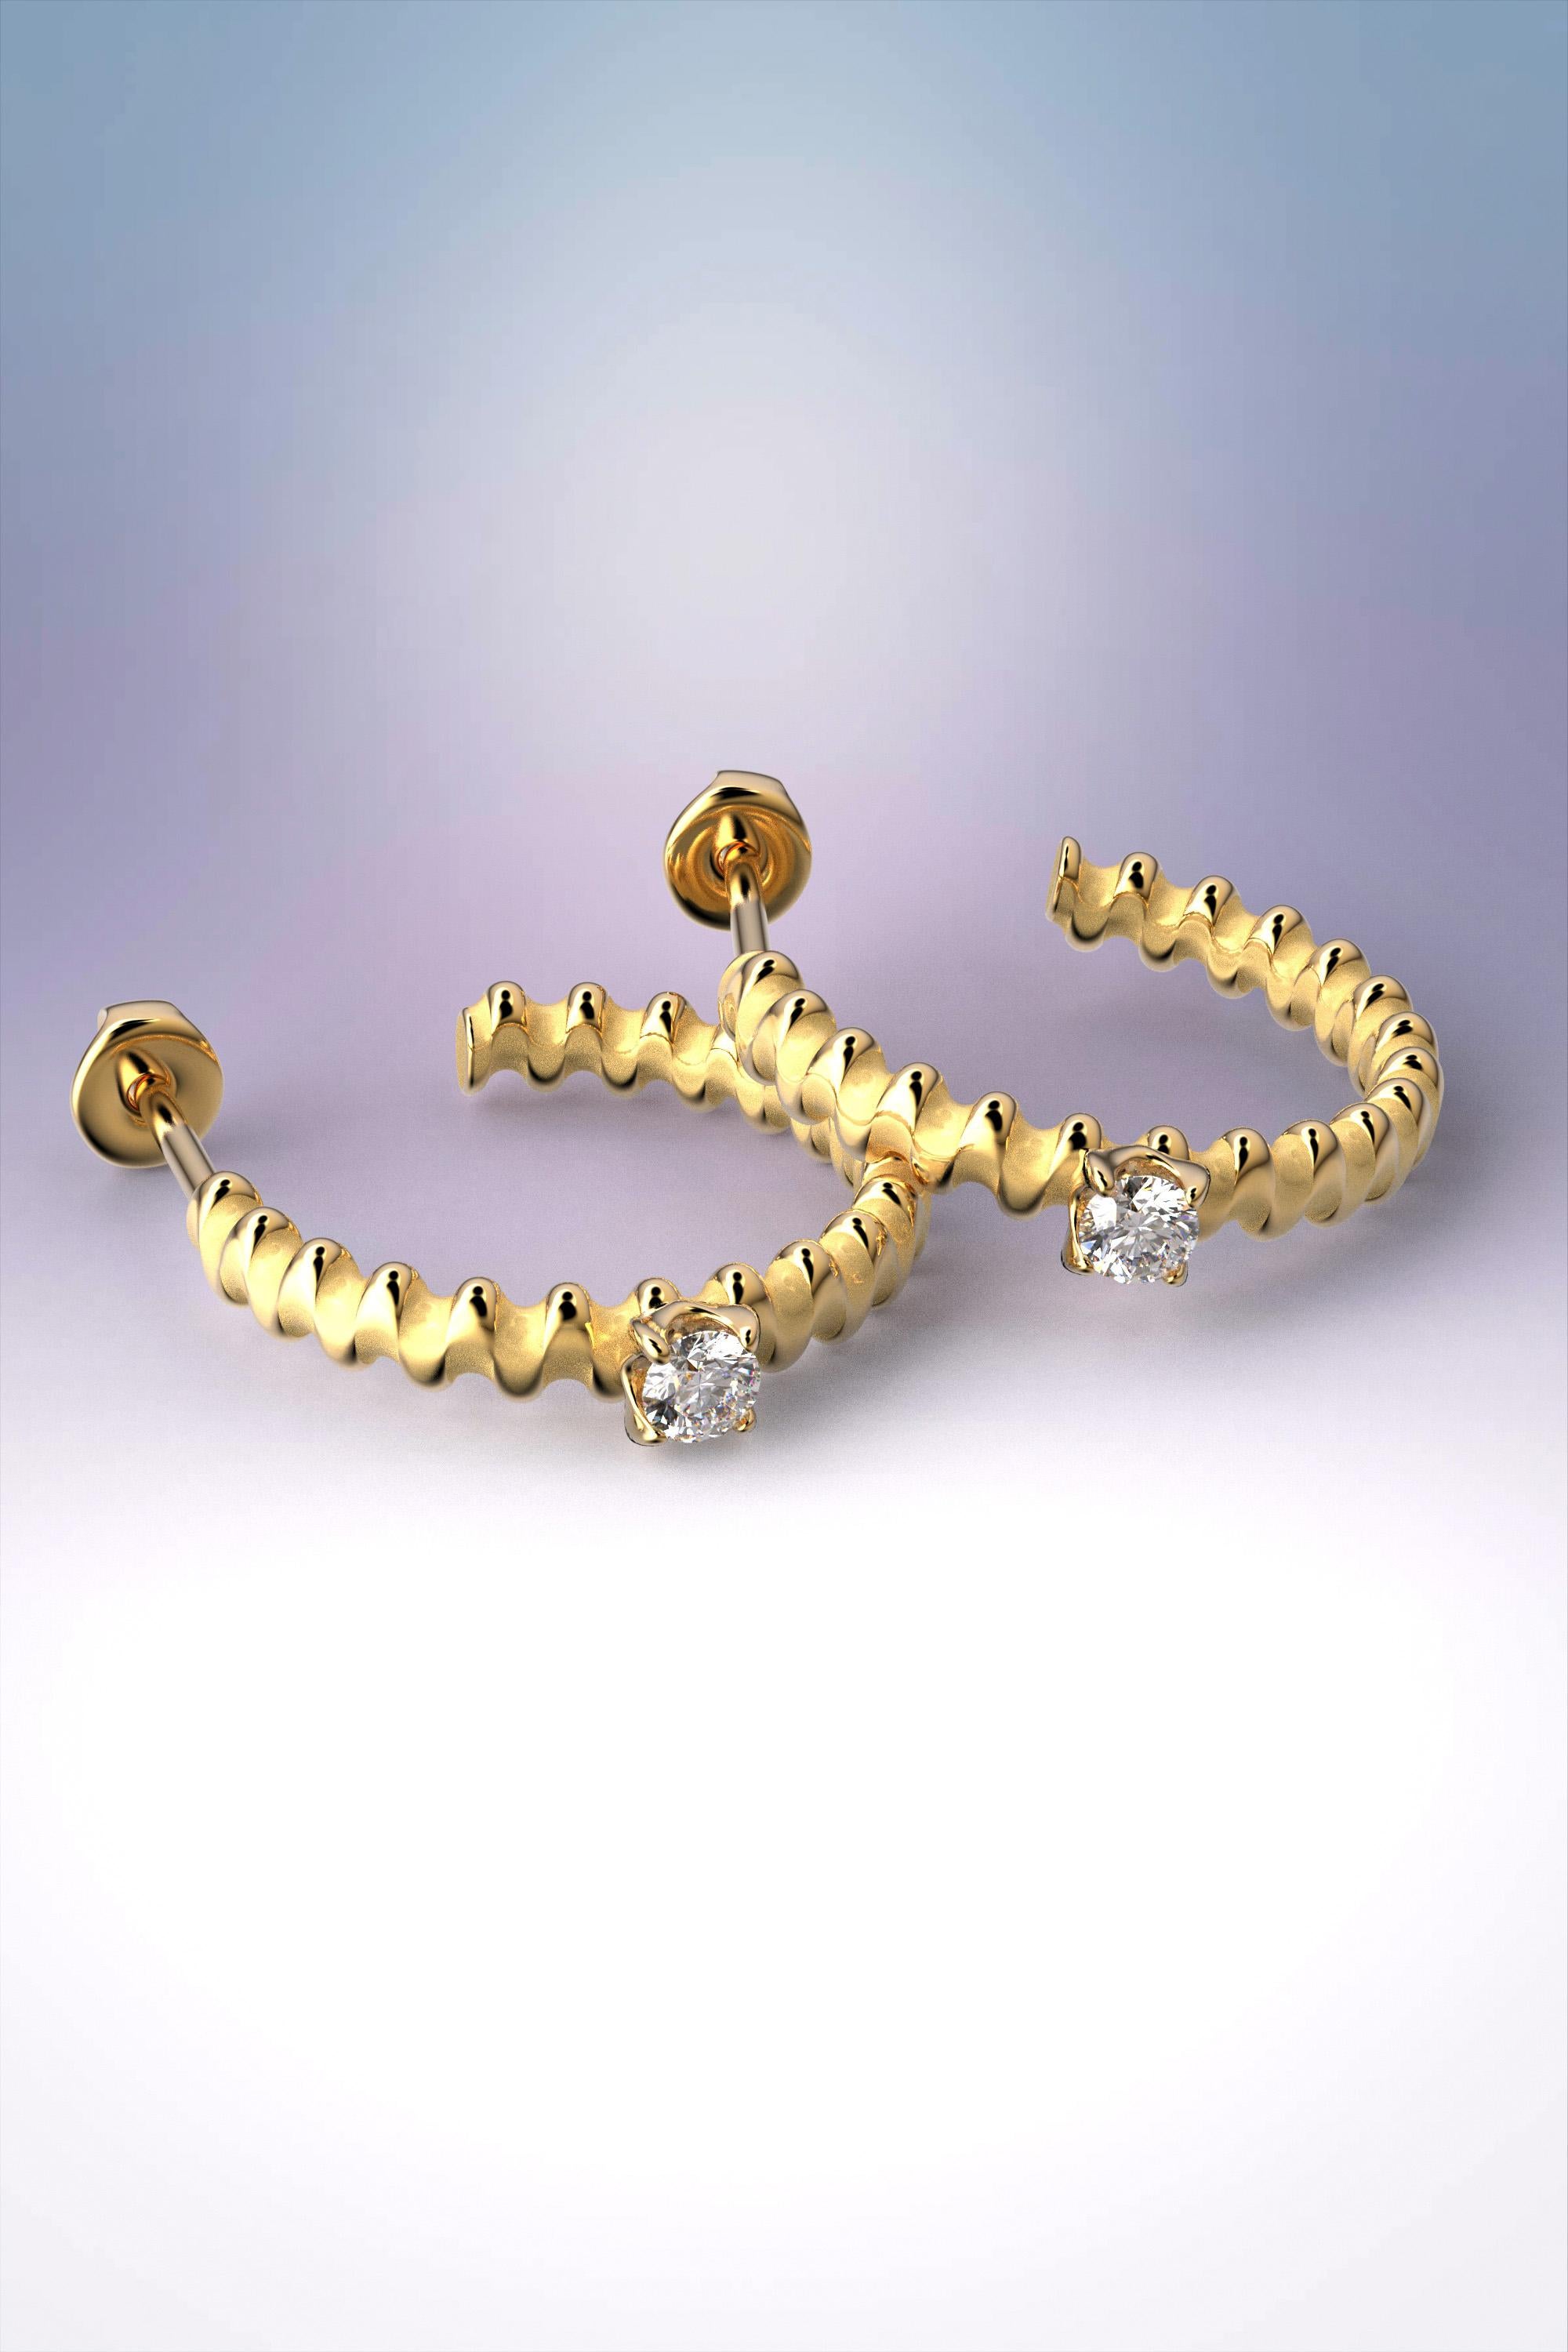 Women's Oltremare Gioielli 18k Diamond Gold Hoop Earrings Designed and Crafted in Italy For Sale